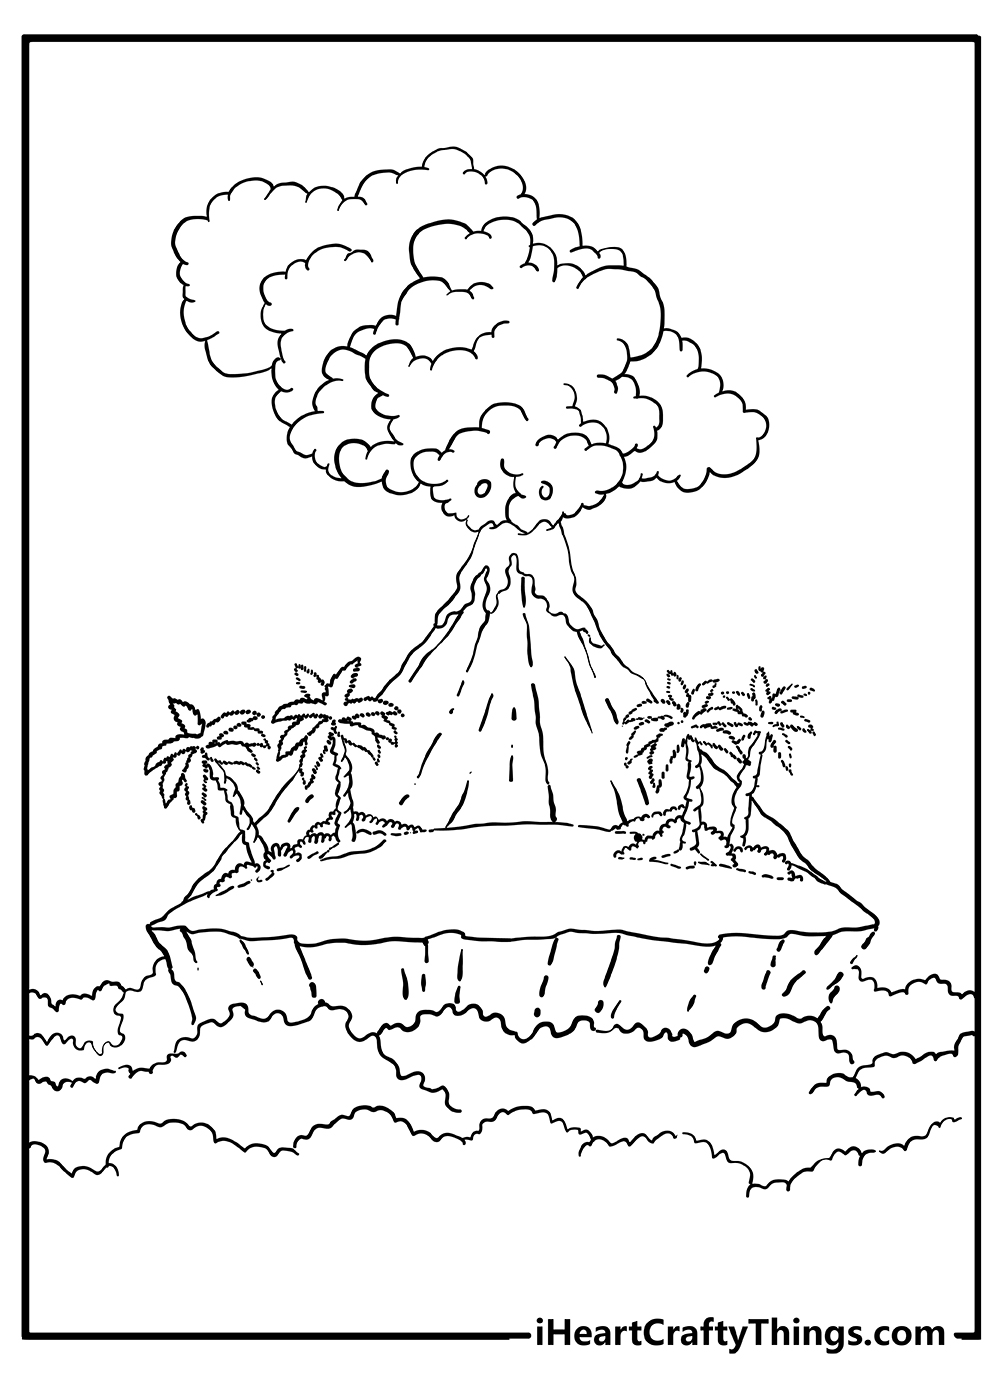 Volcano Coloring Pages free pdf download